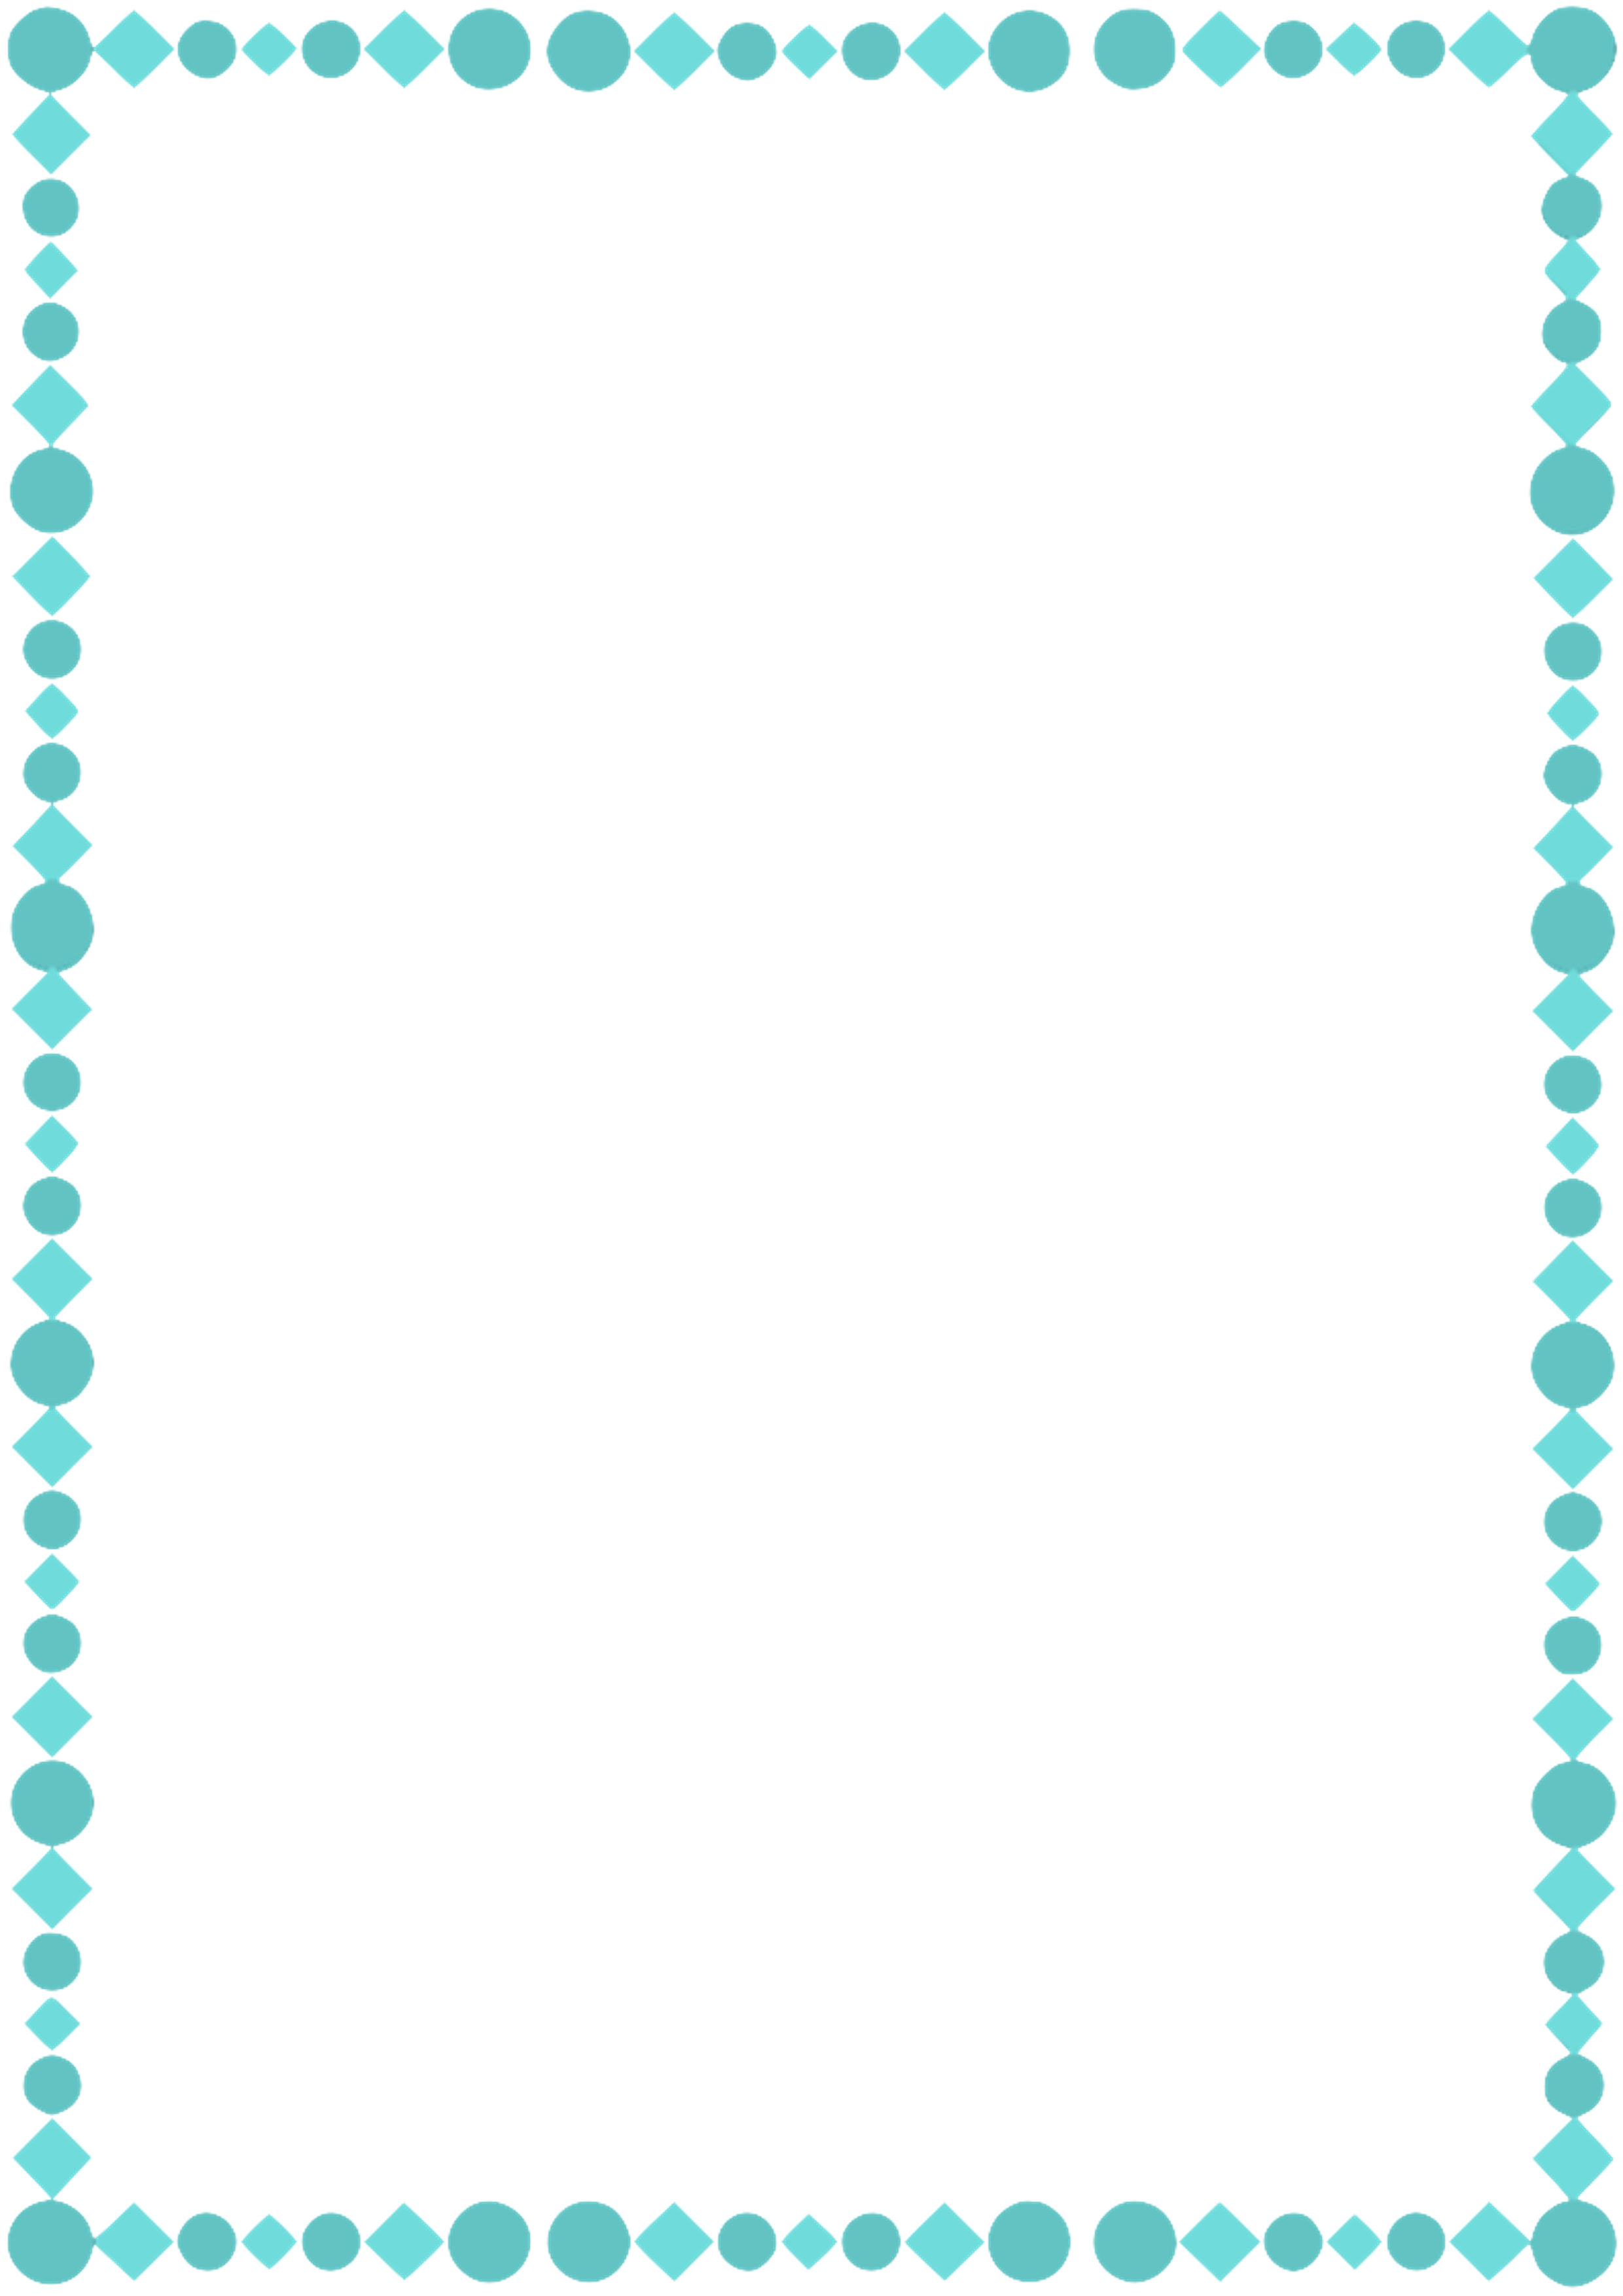 A4 Teal Page Border